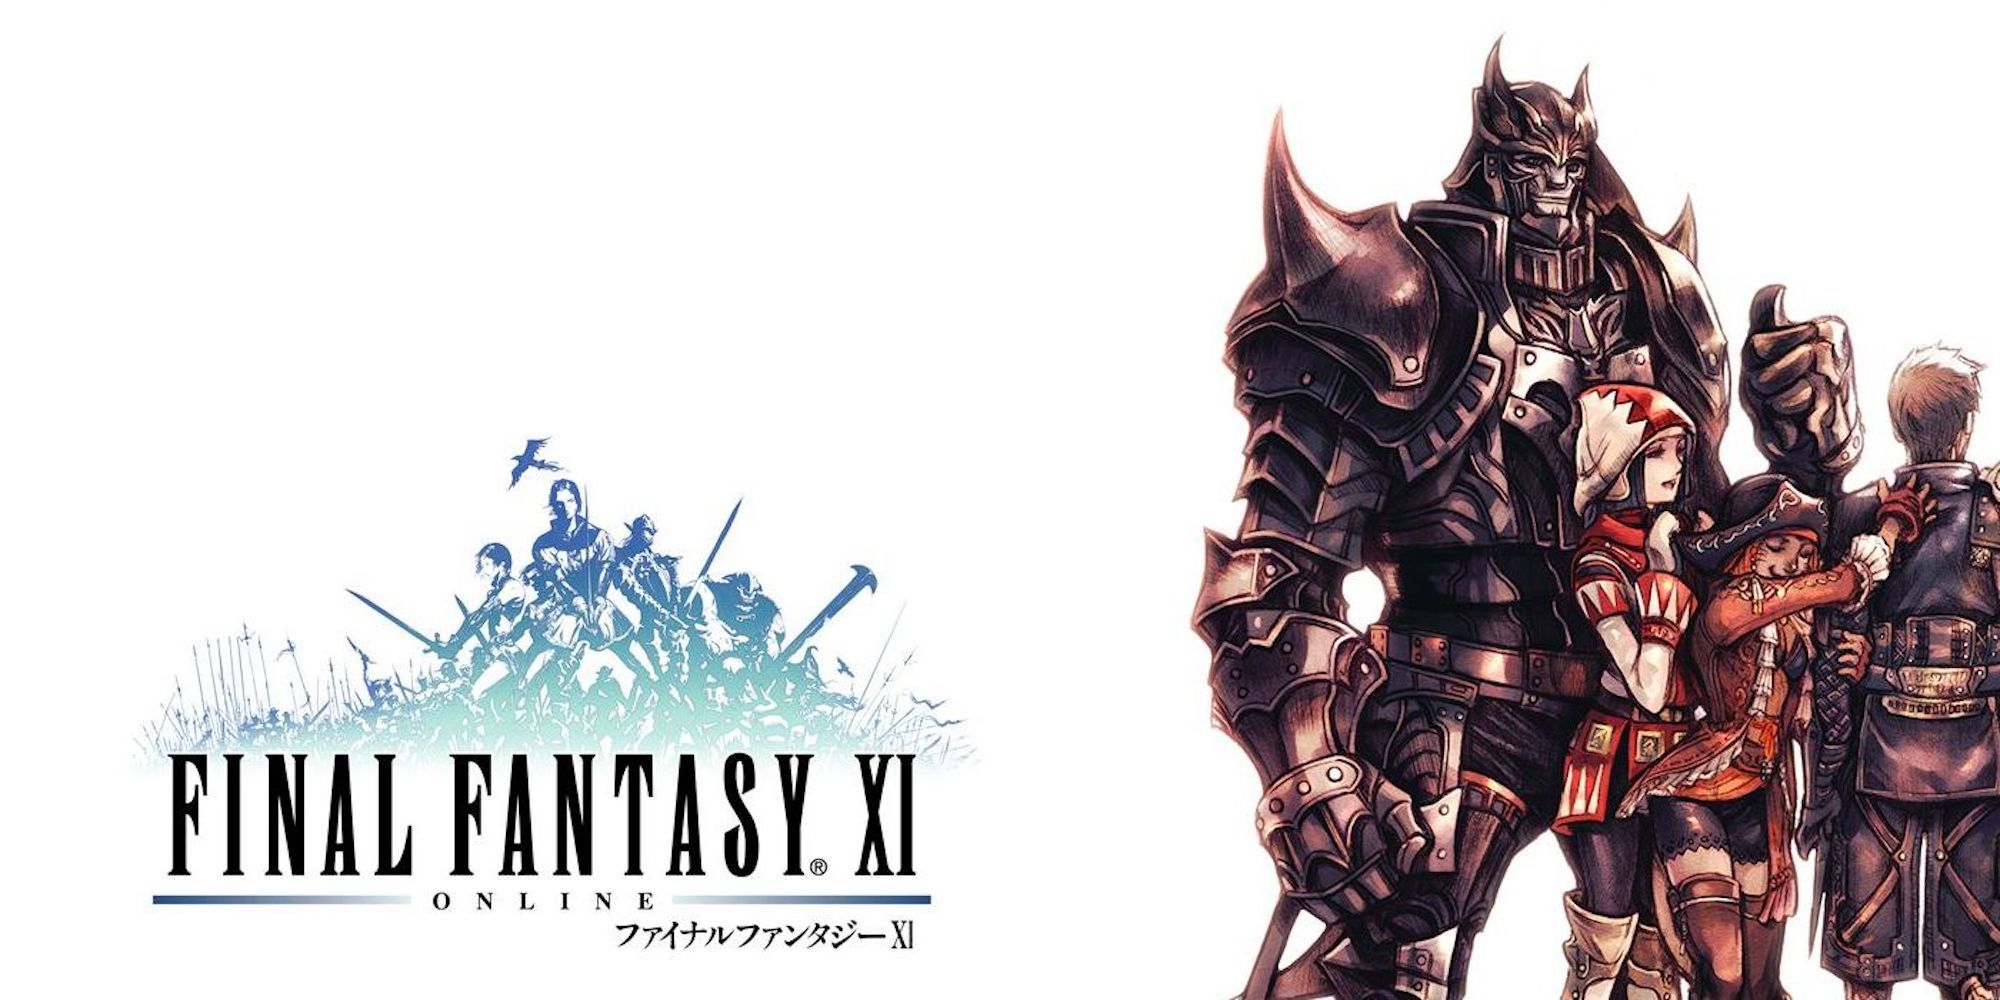 Promo art featuring characters from Final Fantasy XI